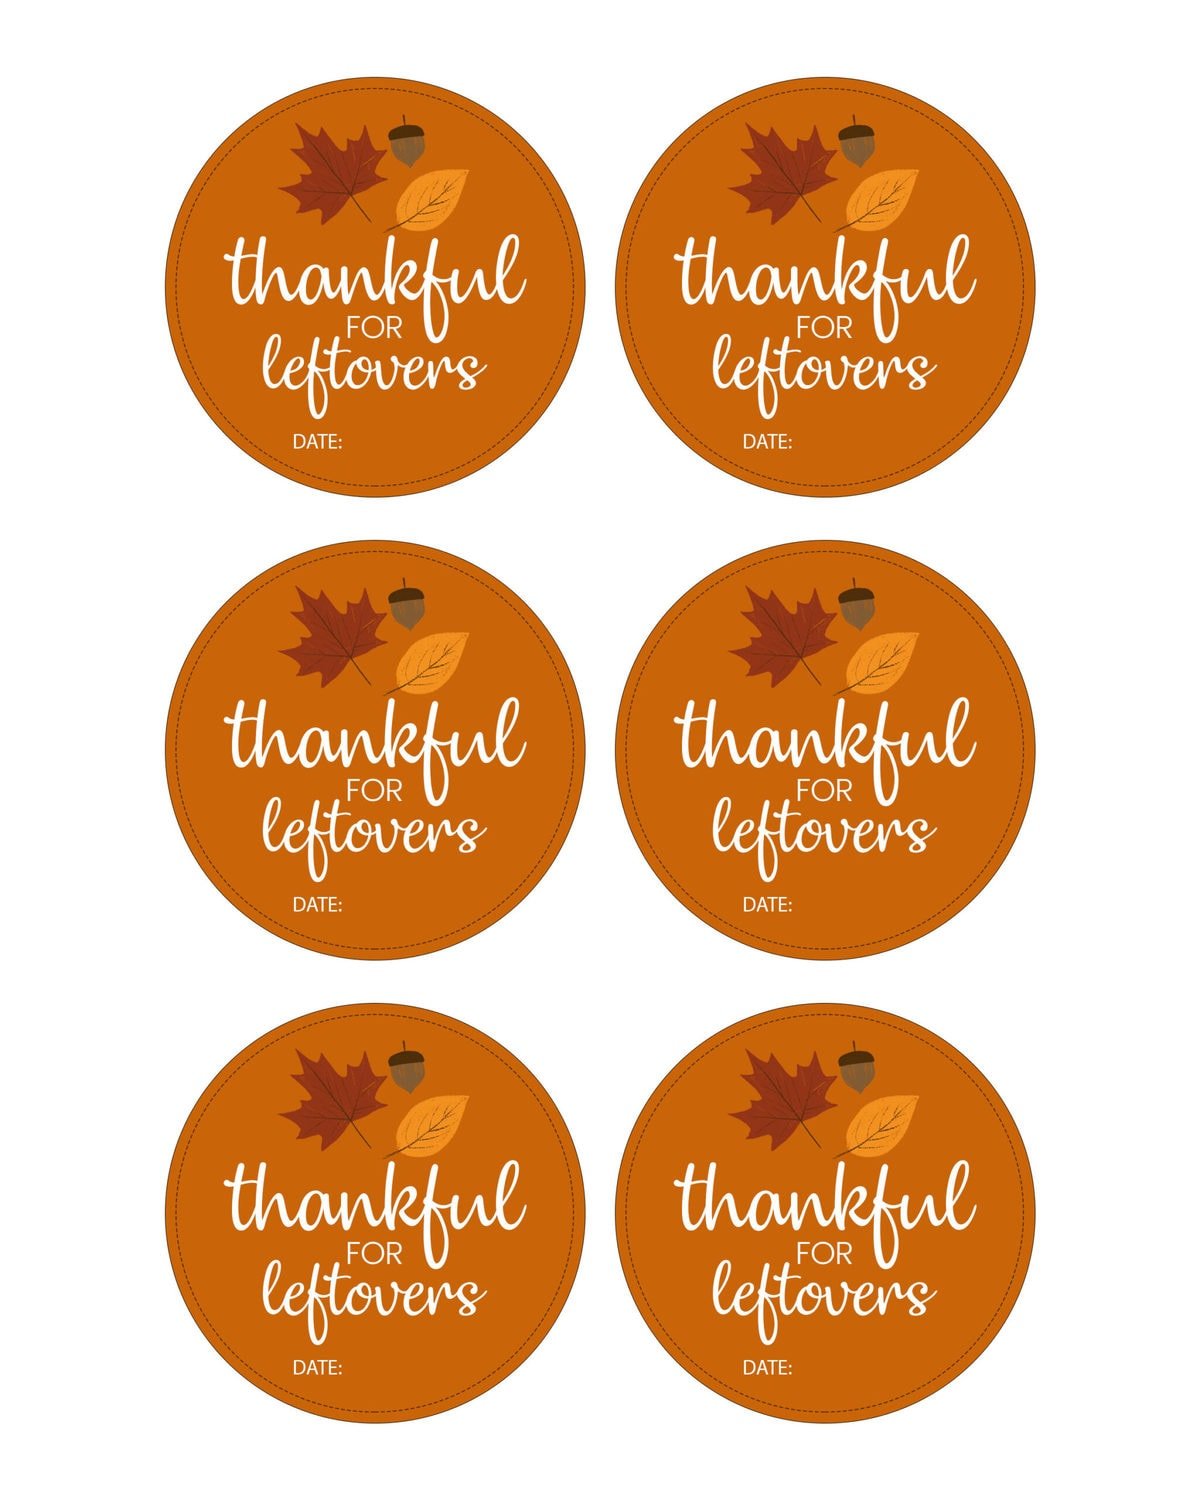 Thanksgiving leftover tags